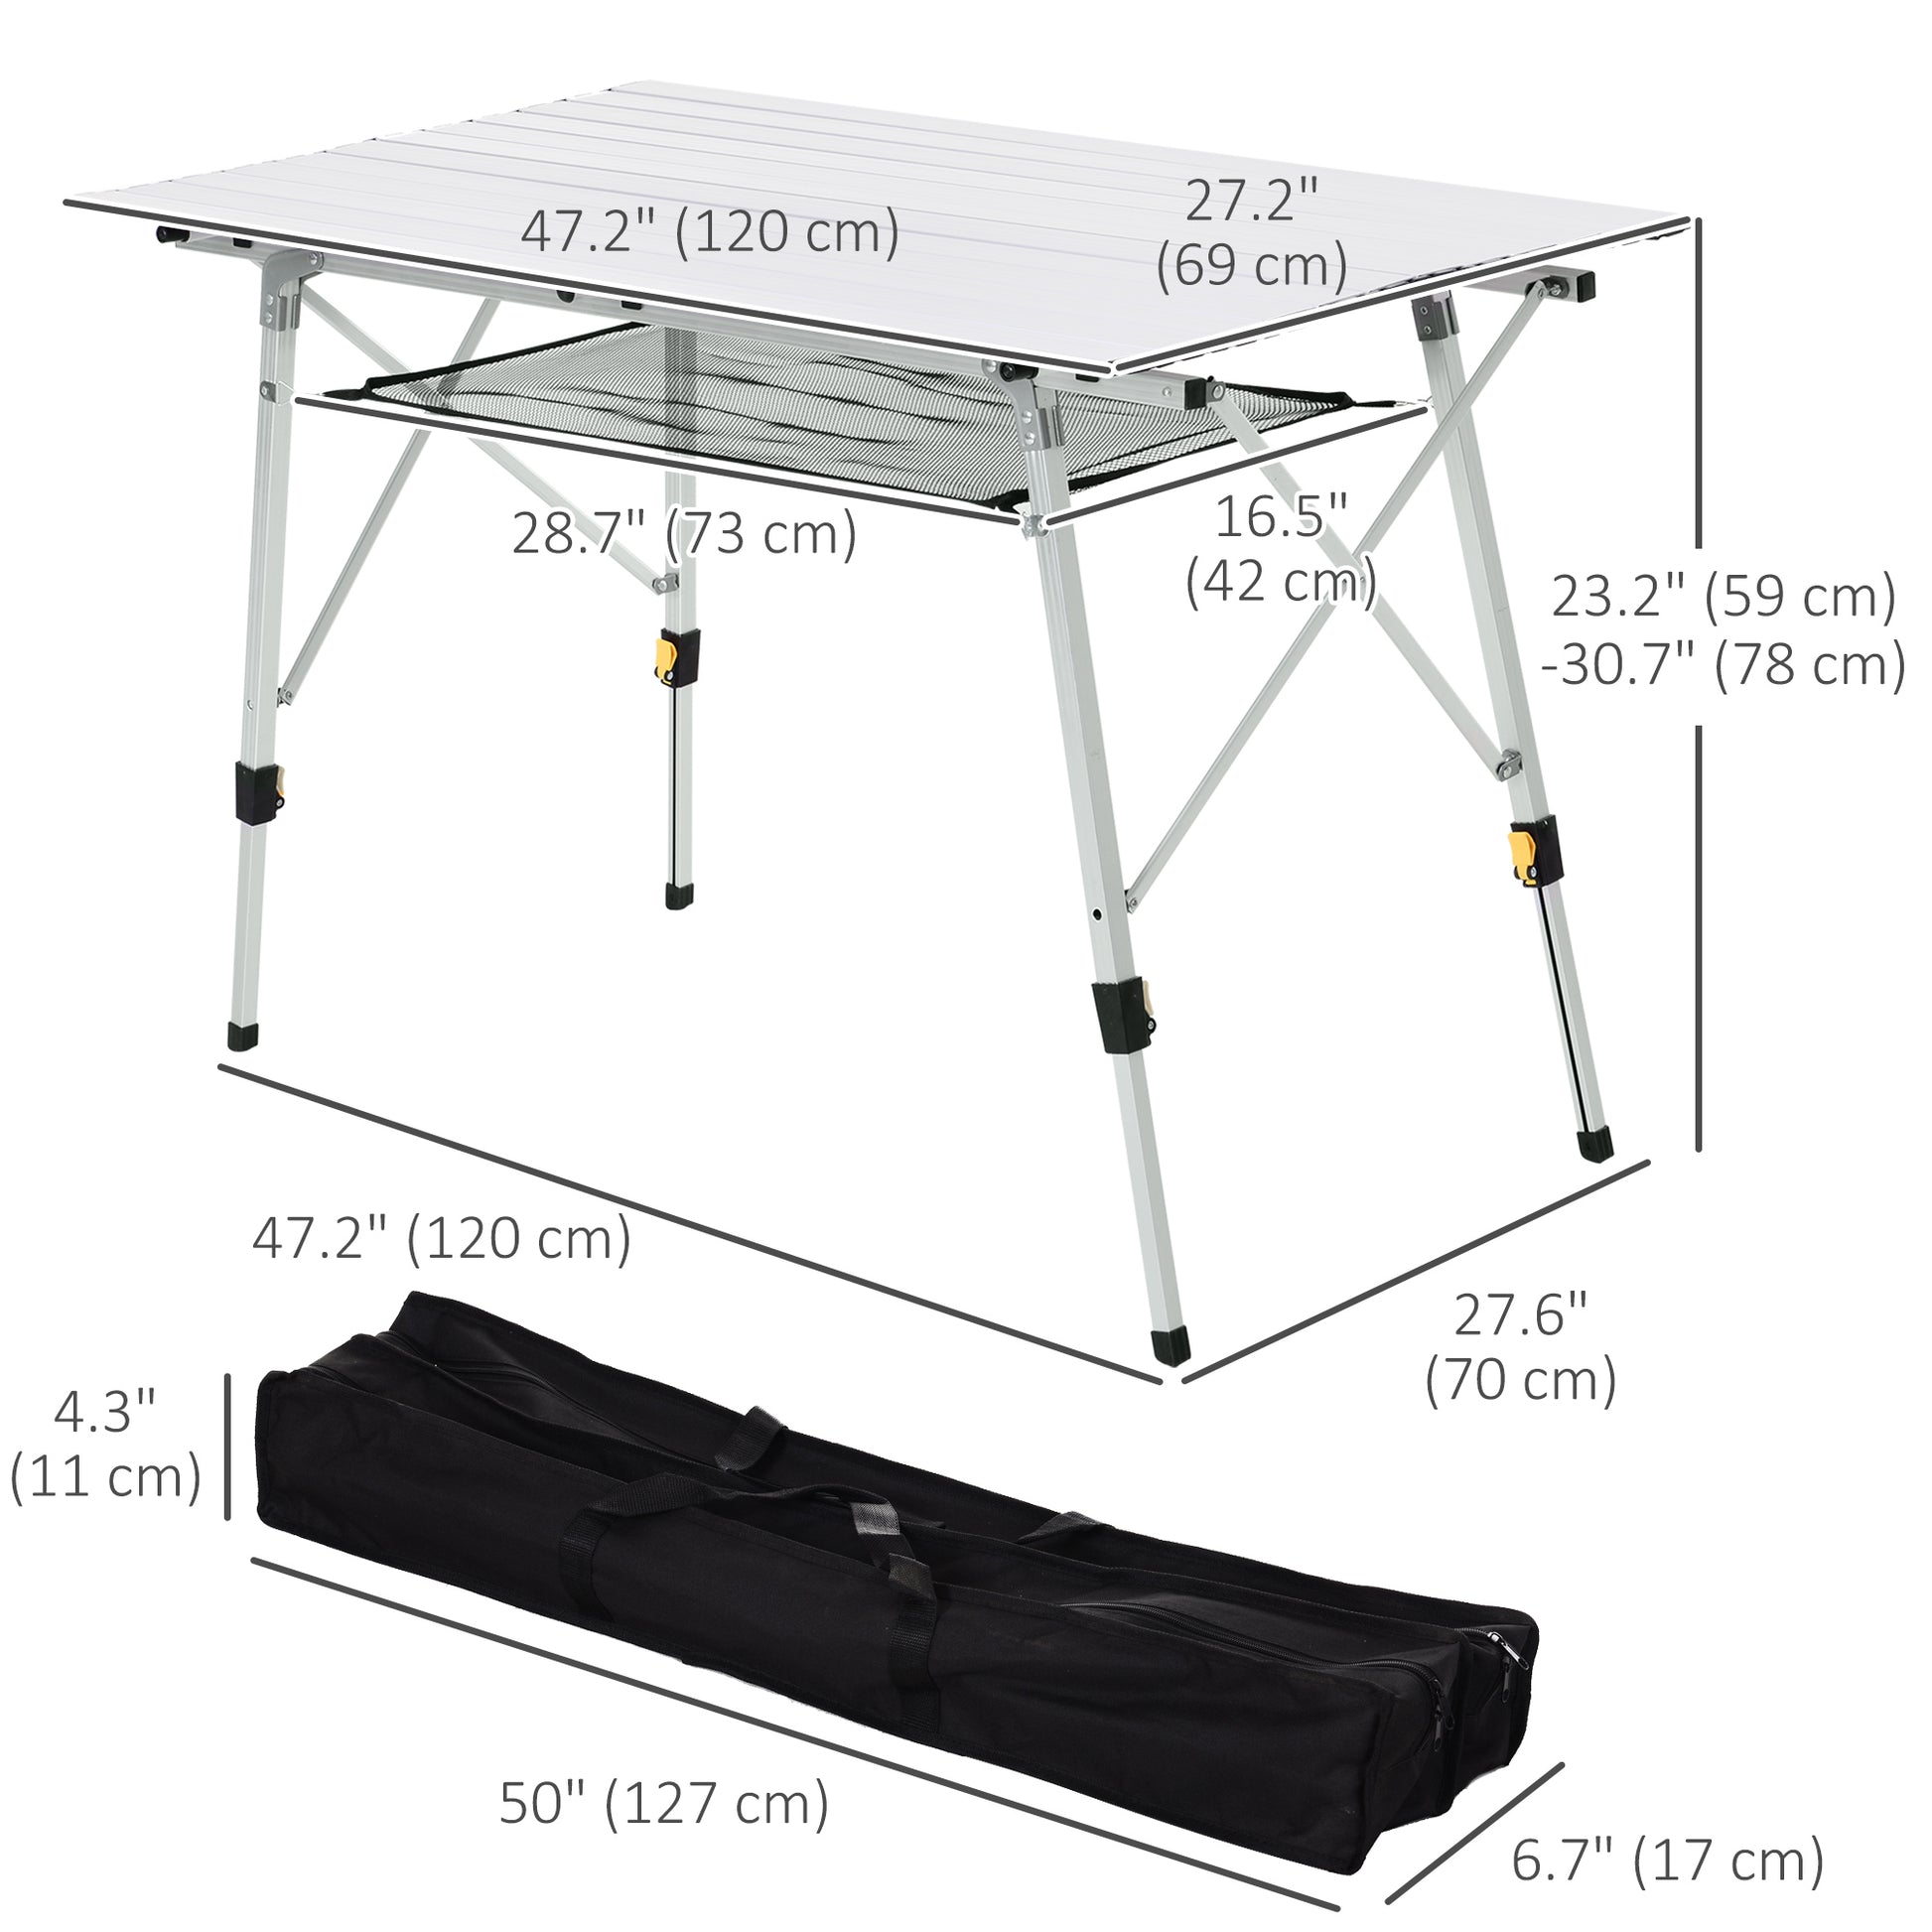 4FT Folding Aluminium Picnic Table Portable Camping BBQ Table Roll Up Top Mesh Layer Rack with Carrying Bag Silver at Gallery Canada